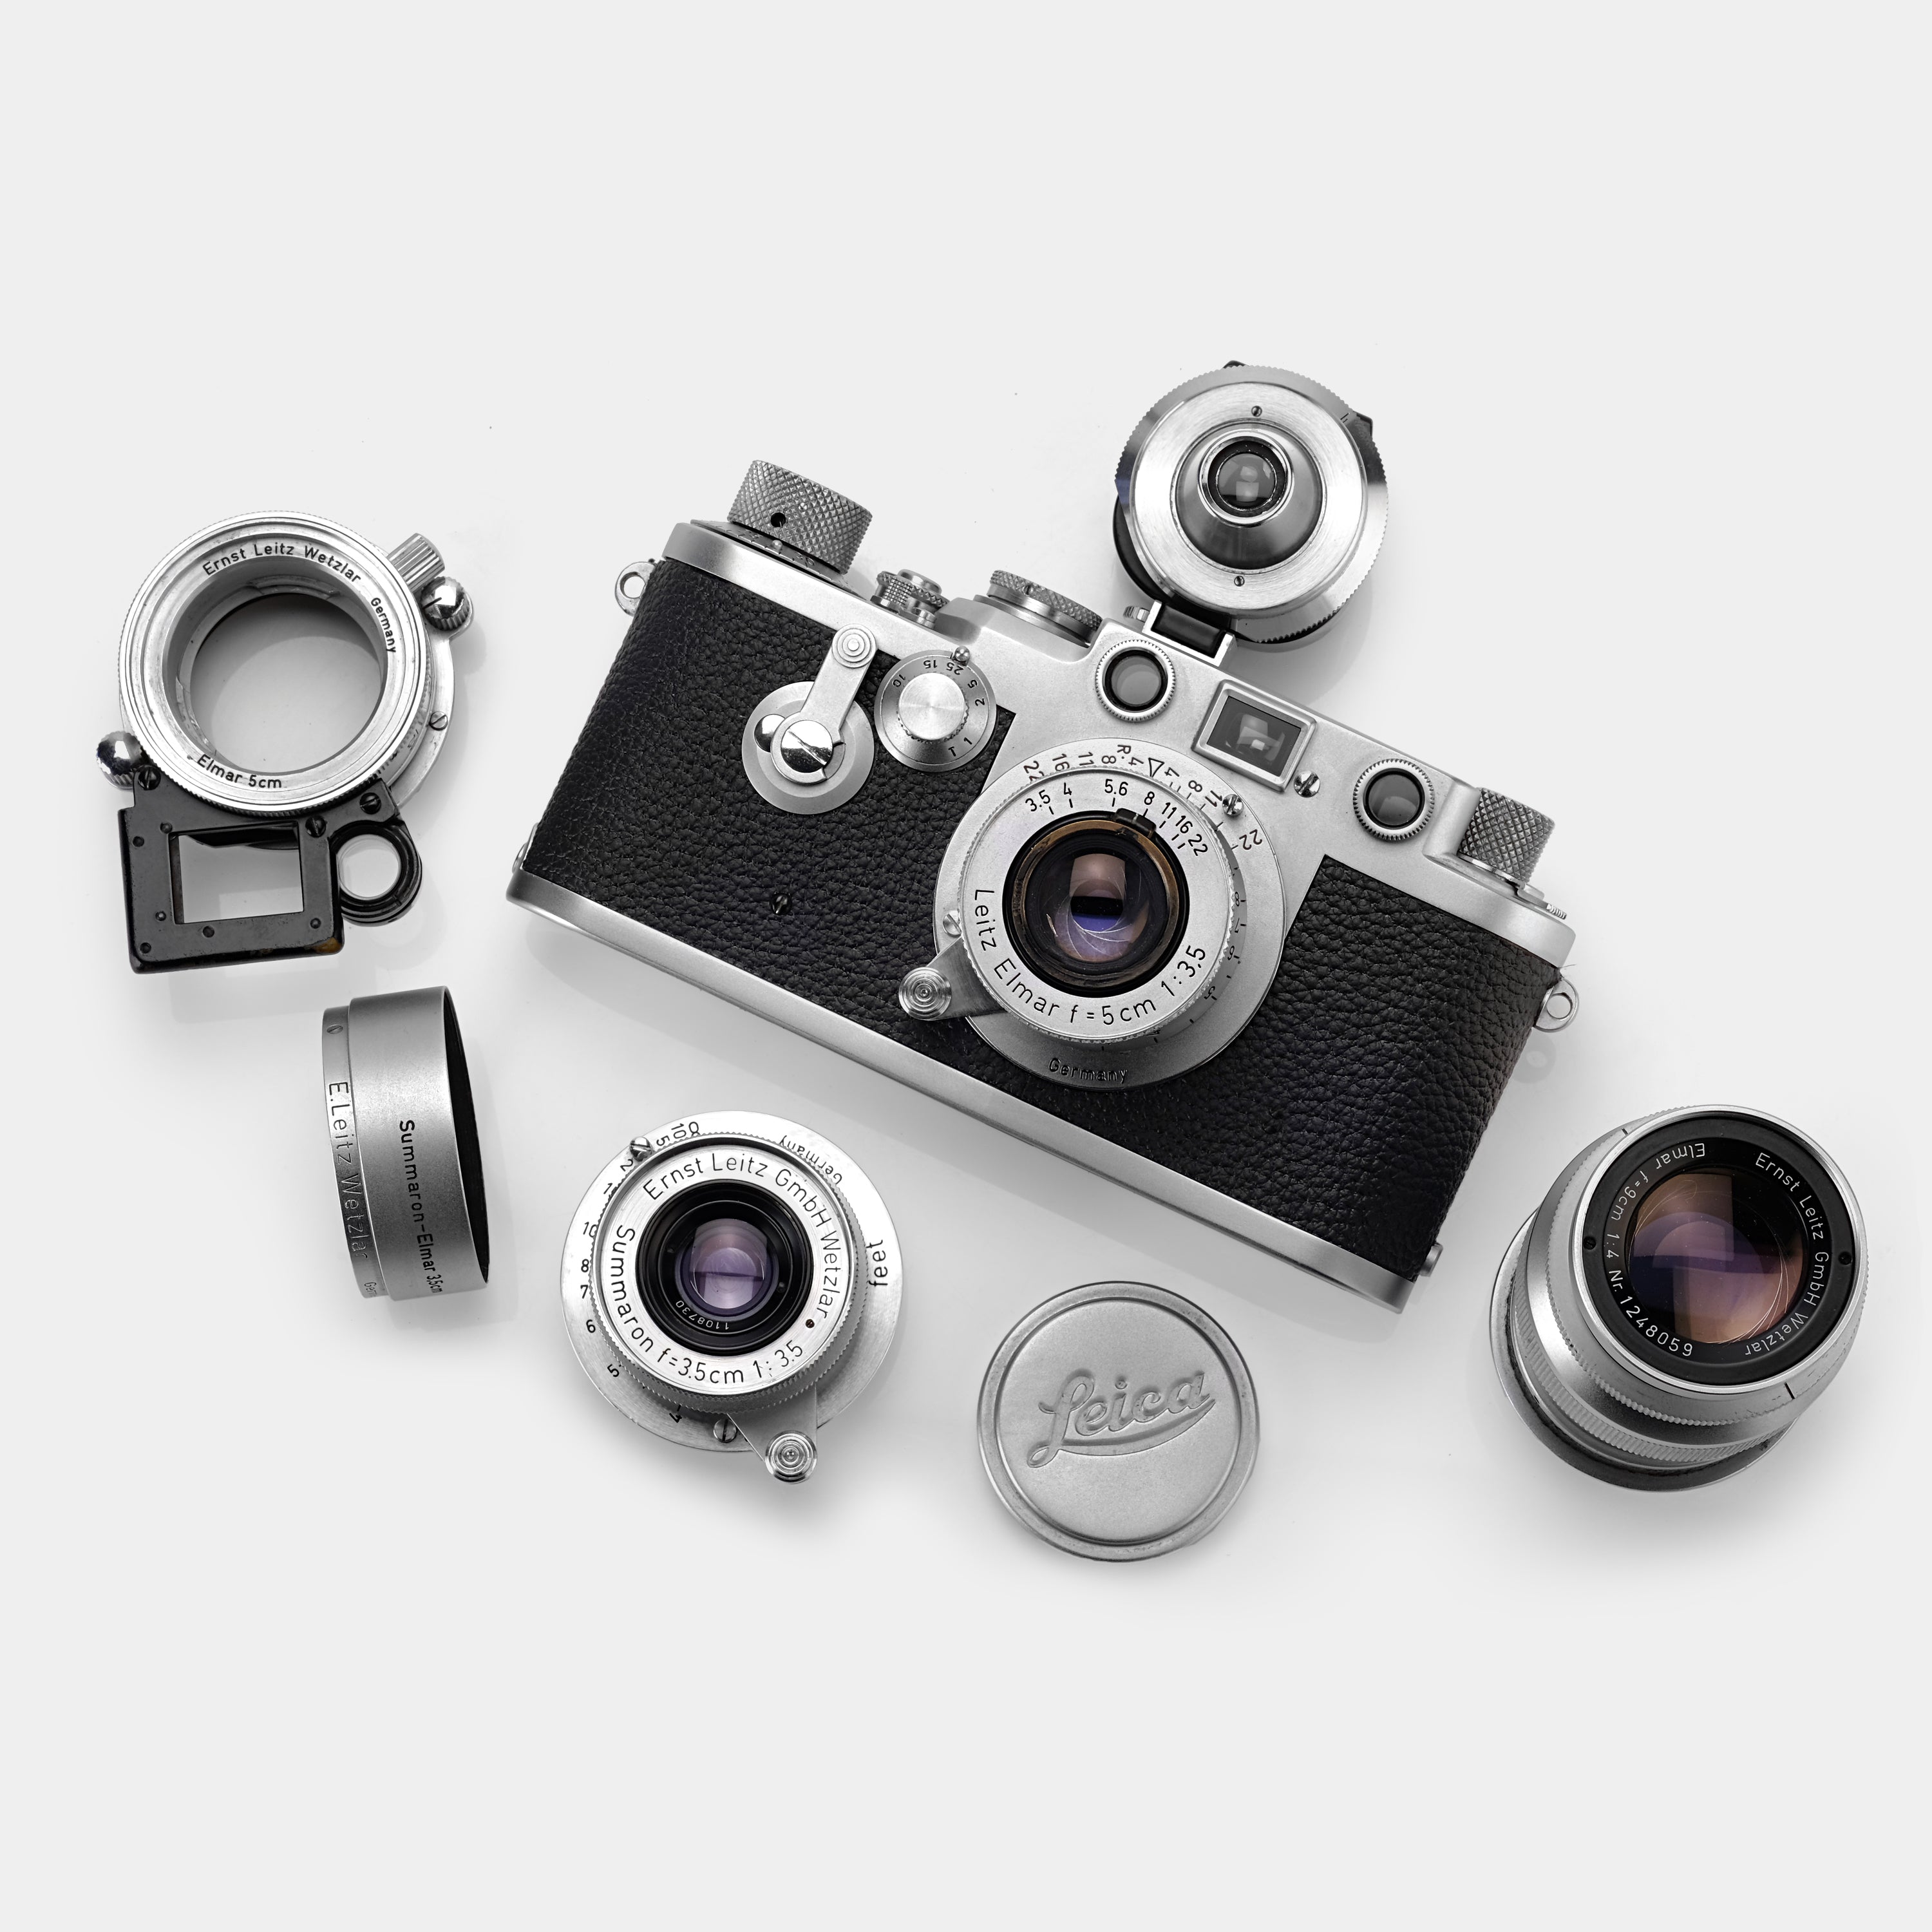 Leica IIIF RD/ST 35mm Rangefinder Film Camera With Lenses and Accessories